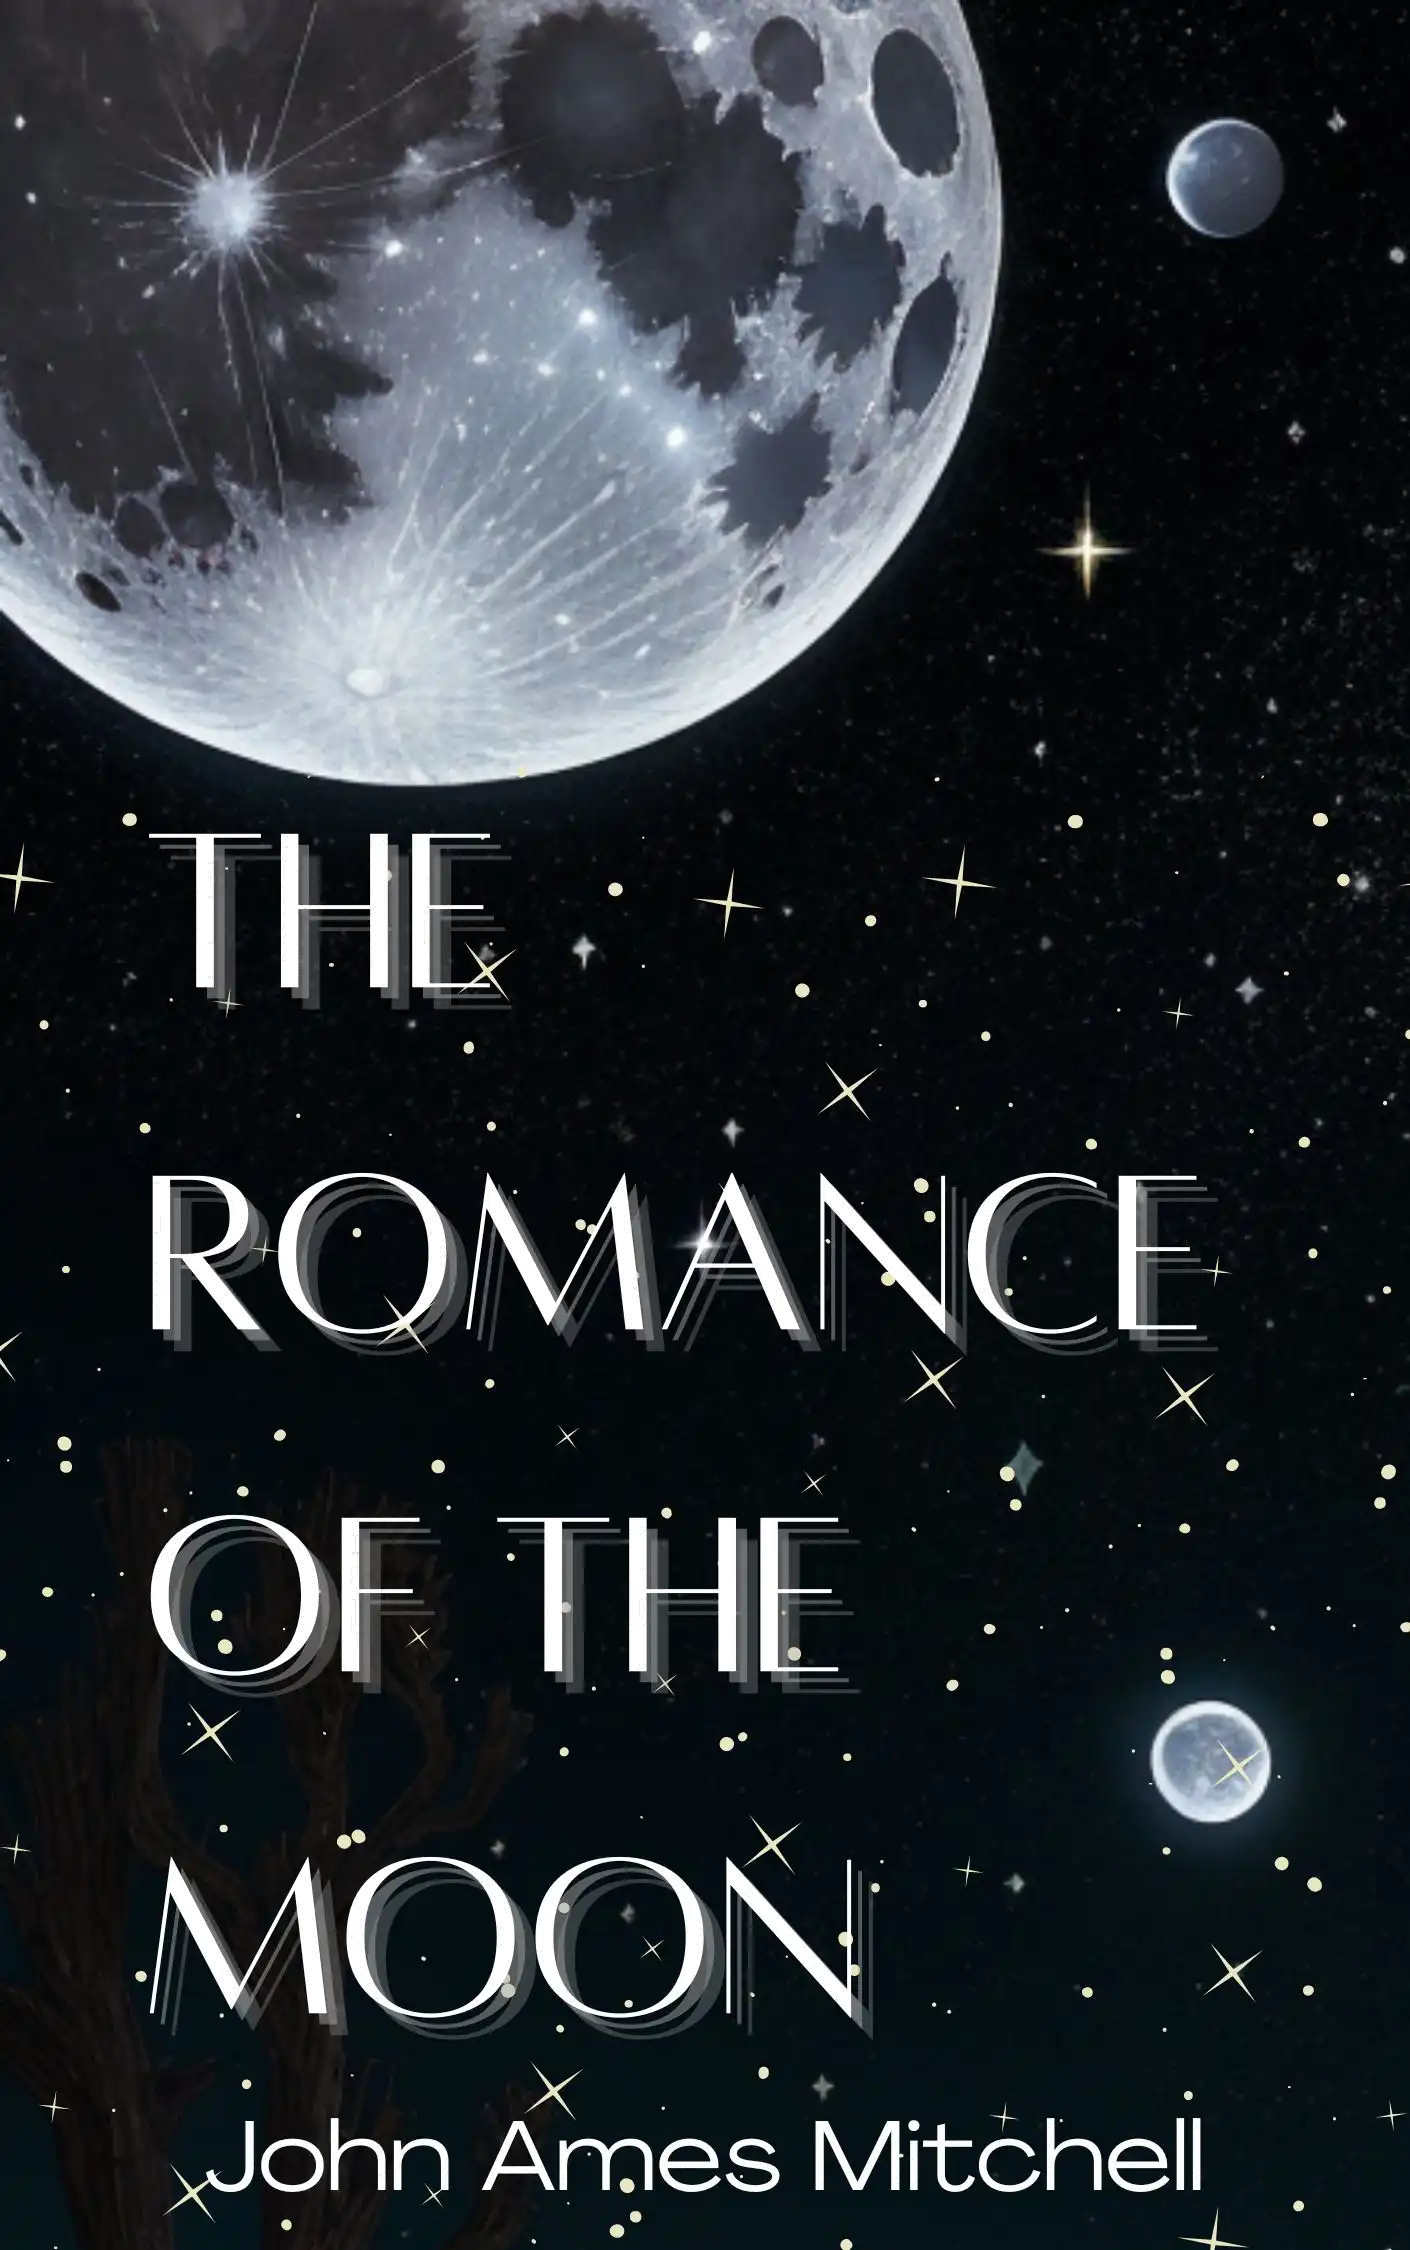 The Romance of the Moon by John Ames Mitchell Audiobook